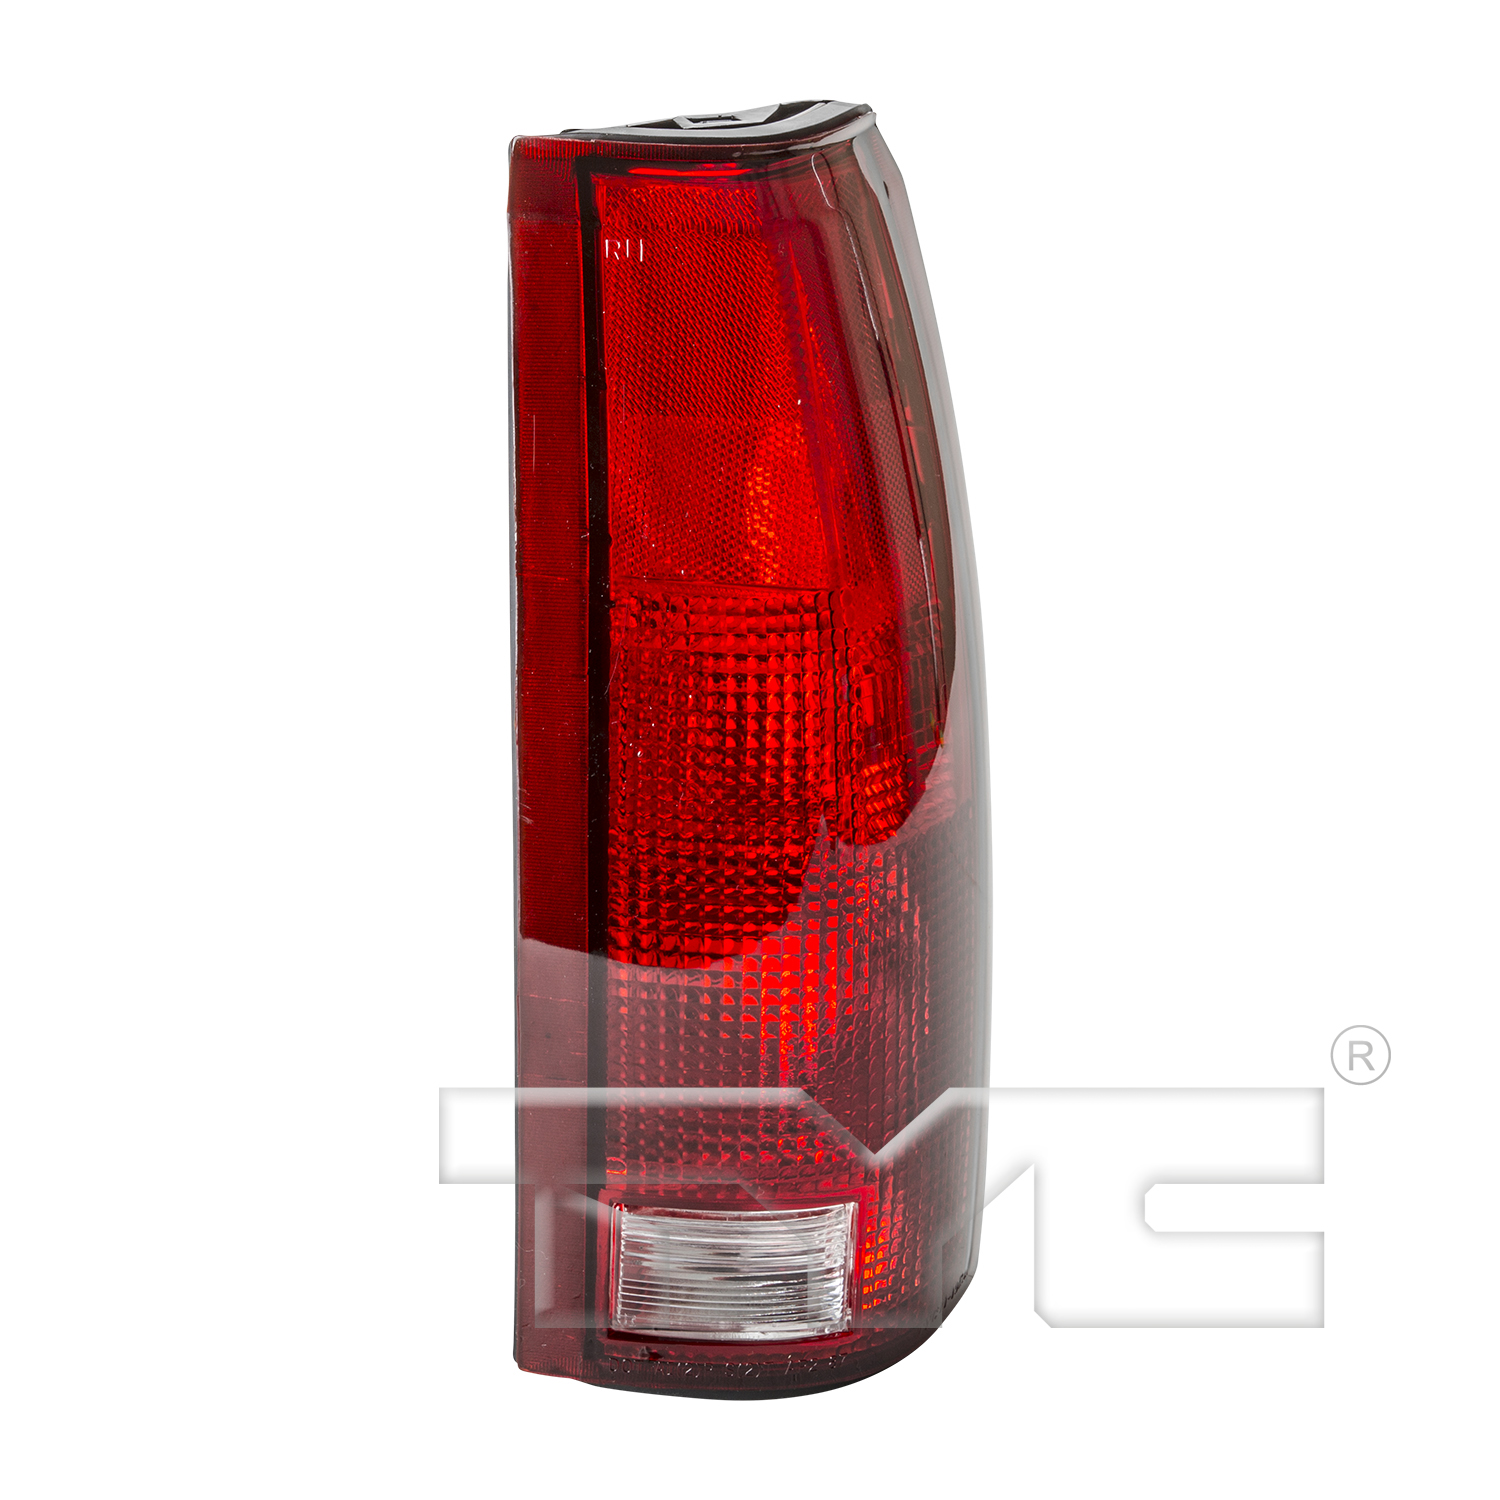 Aftermarket TAILLIGHTS for CHEVROLET - C2500 SUBURBAN, C2500 SUBURBAN,92-99,RT Taillamp lens